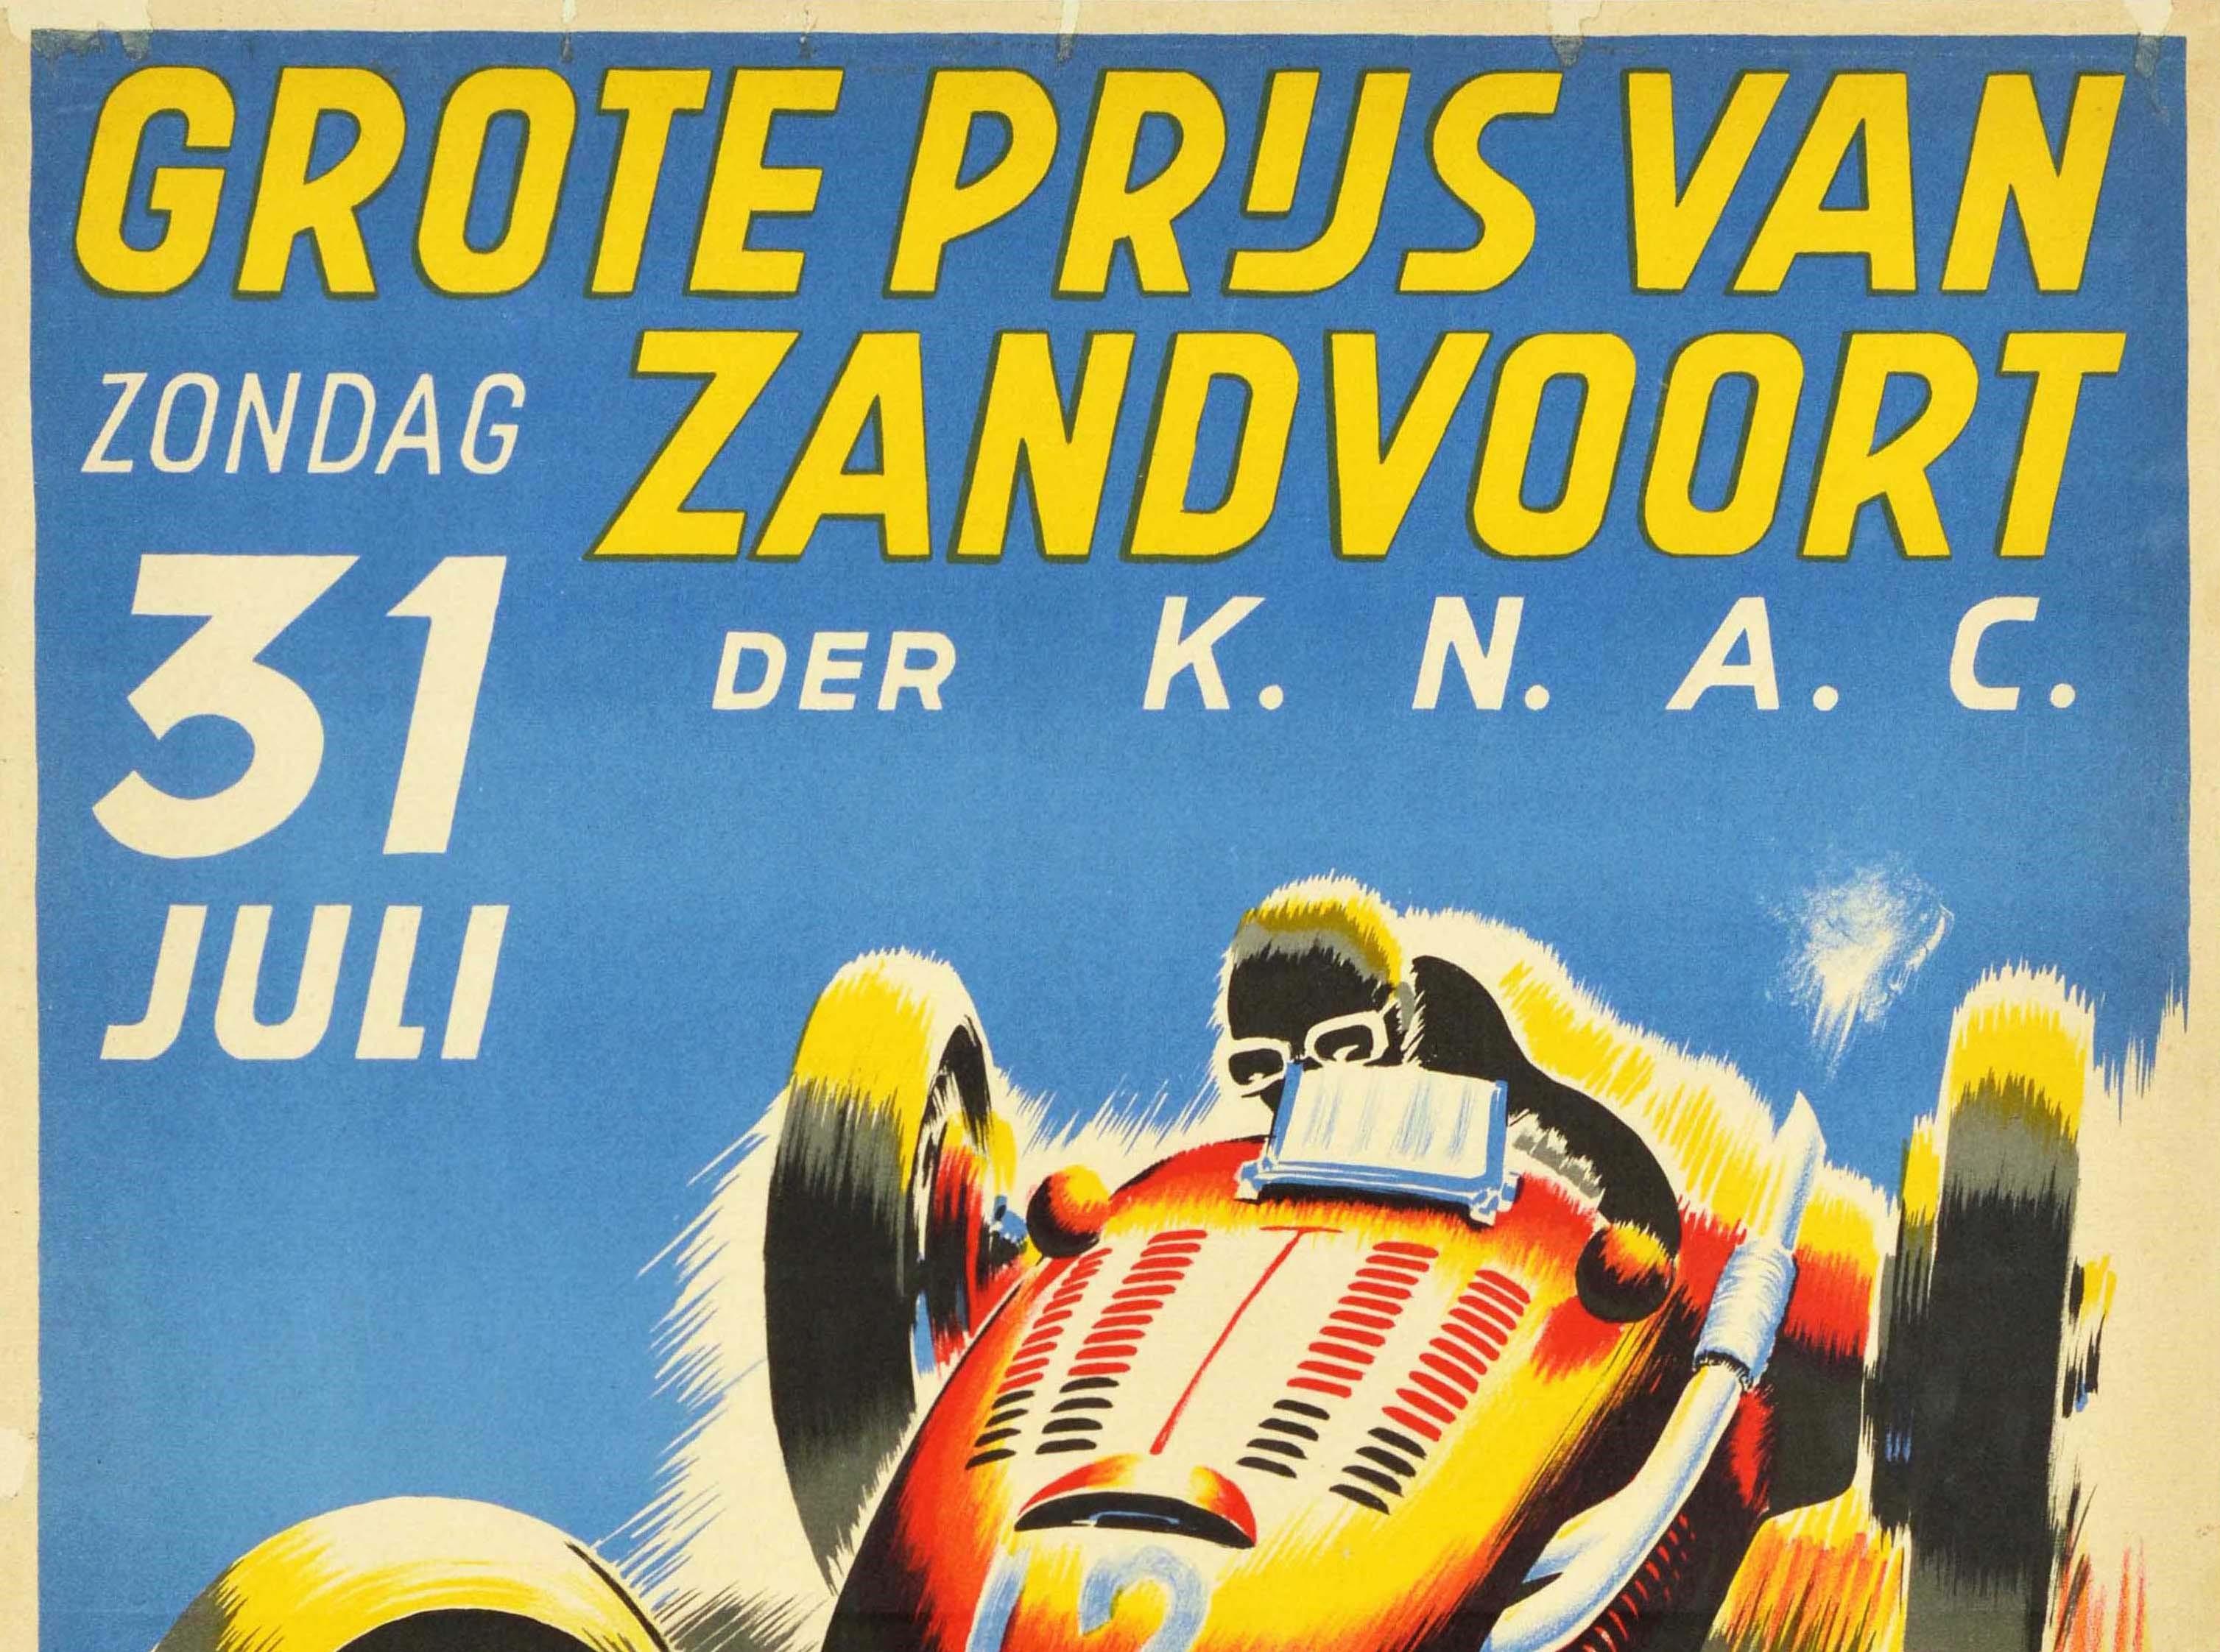 Original vintage motorsport poster for the Grote Prijs van Zandvoort der KNAC / Zandvoort Grand Prix on 31 July 1949 featuring a dynamic design depicting a classic car racing at speed towards the viewer with the bold title and date in yellow and